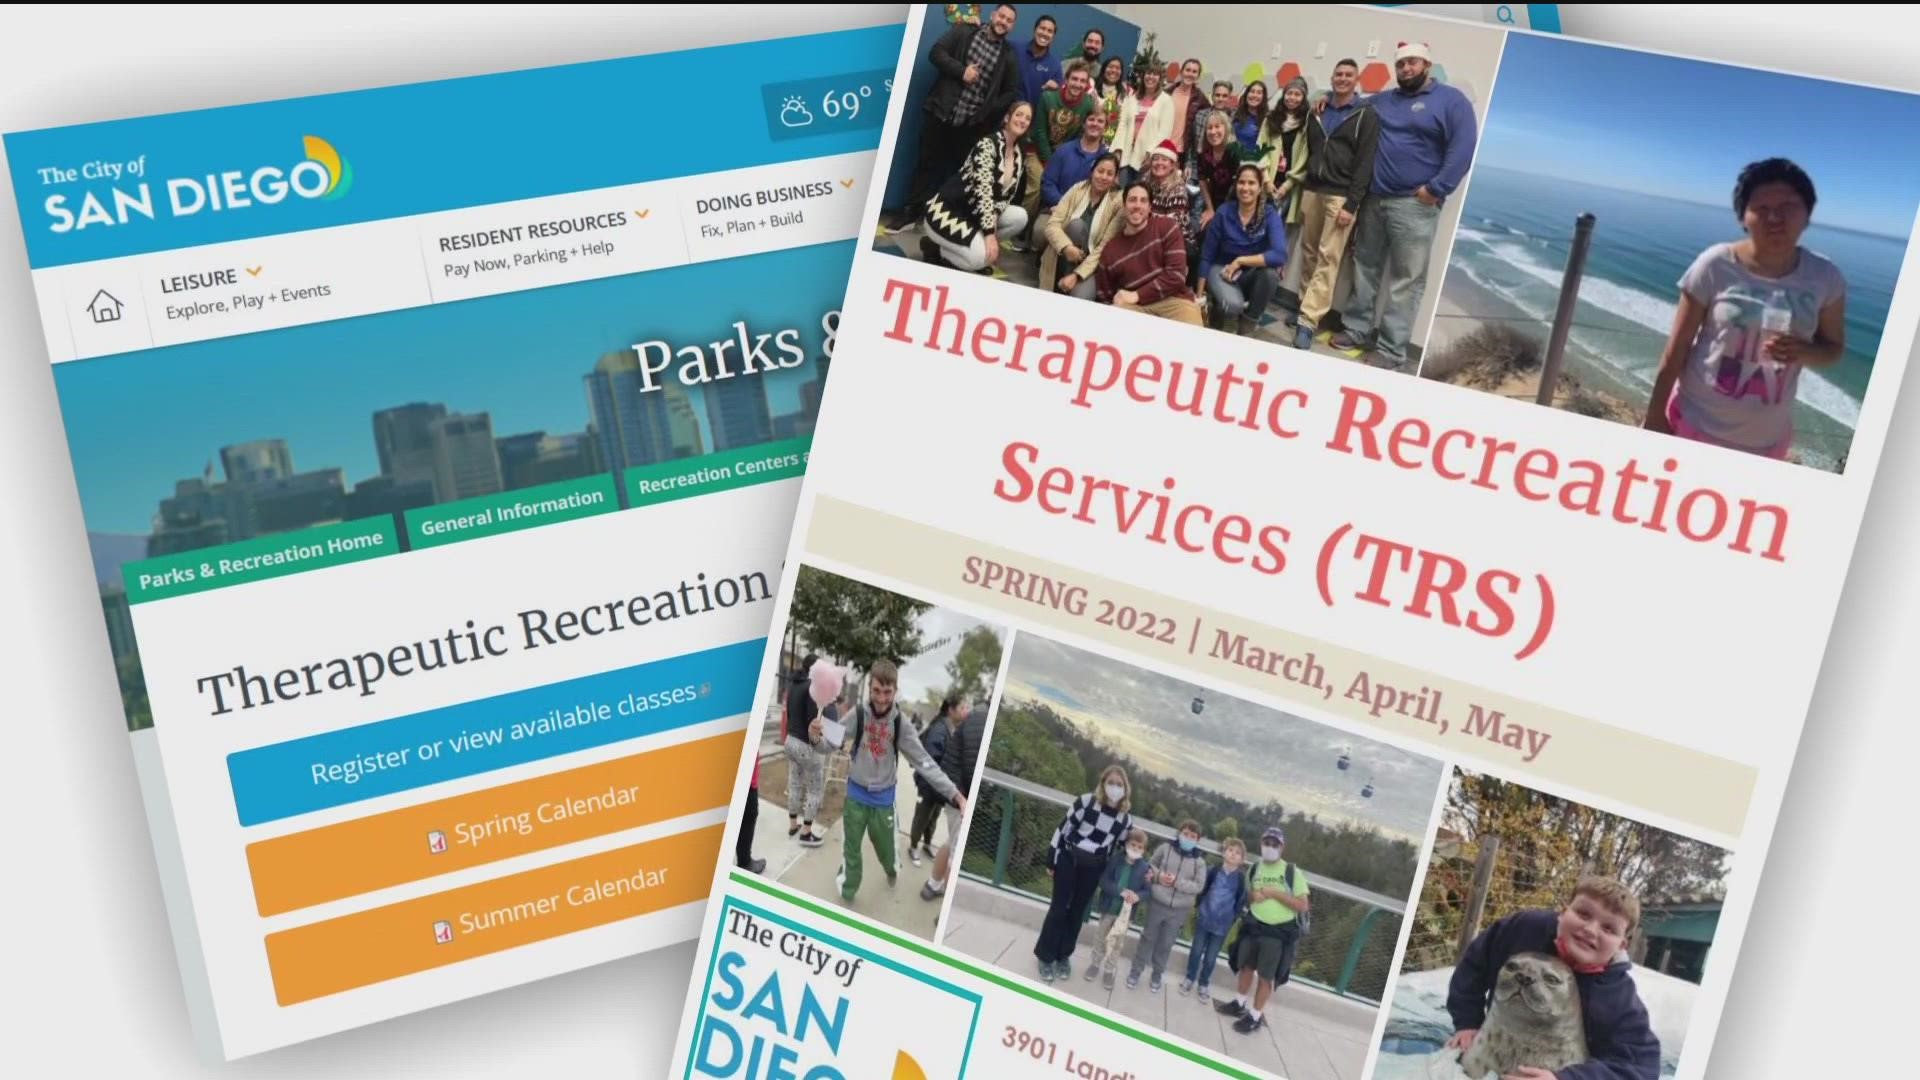 City of San Diego staff looks back on the program that started in 1972 called 'Handicapped Services'.